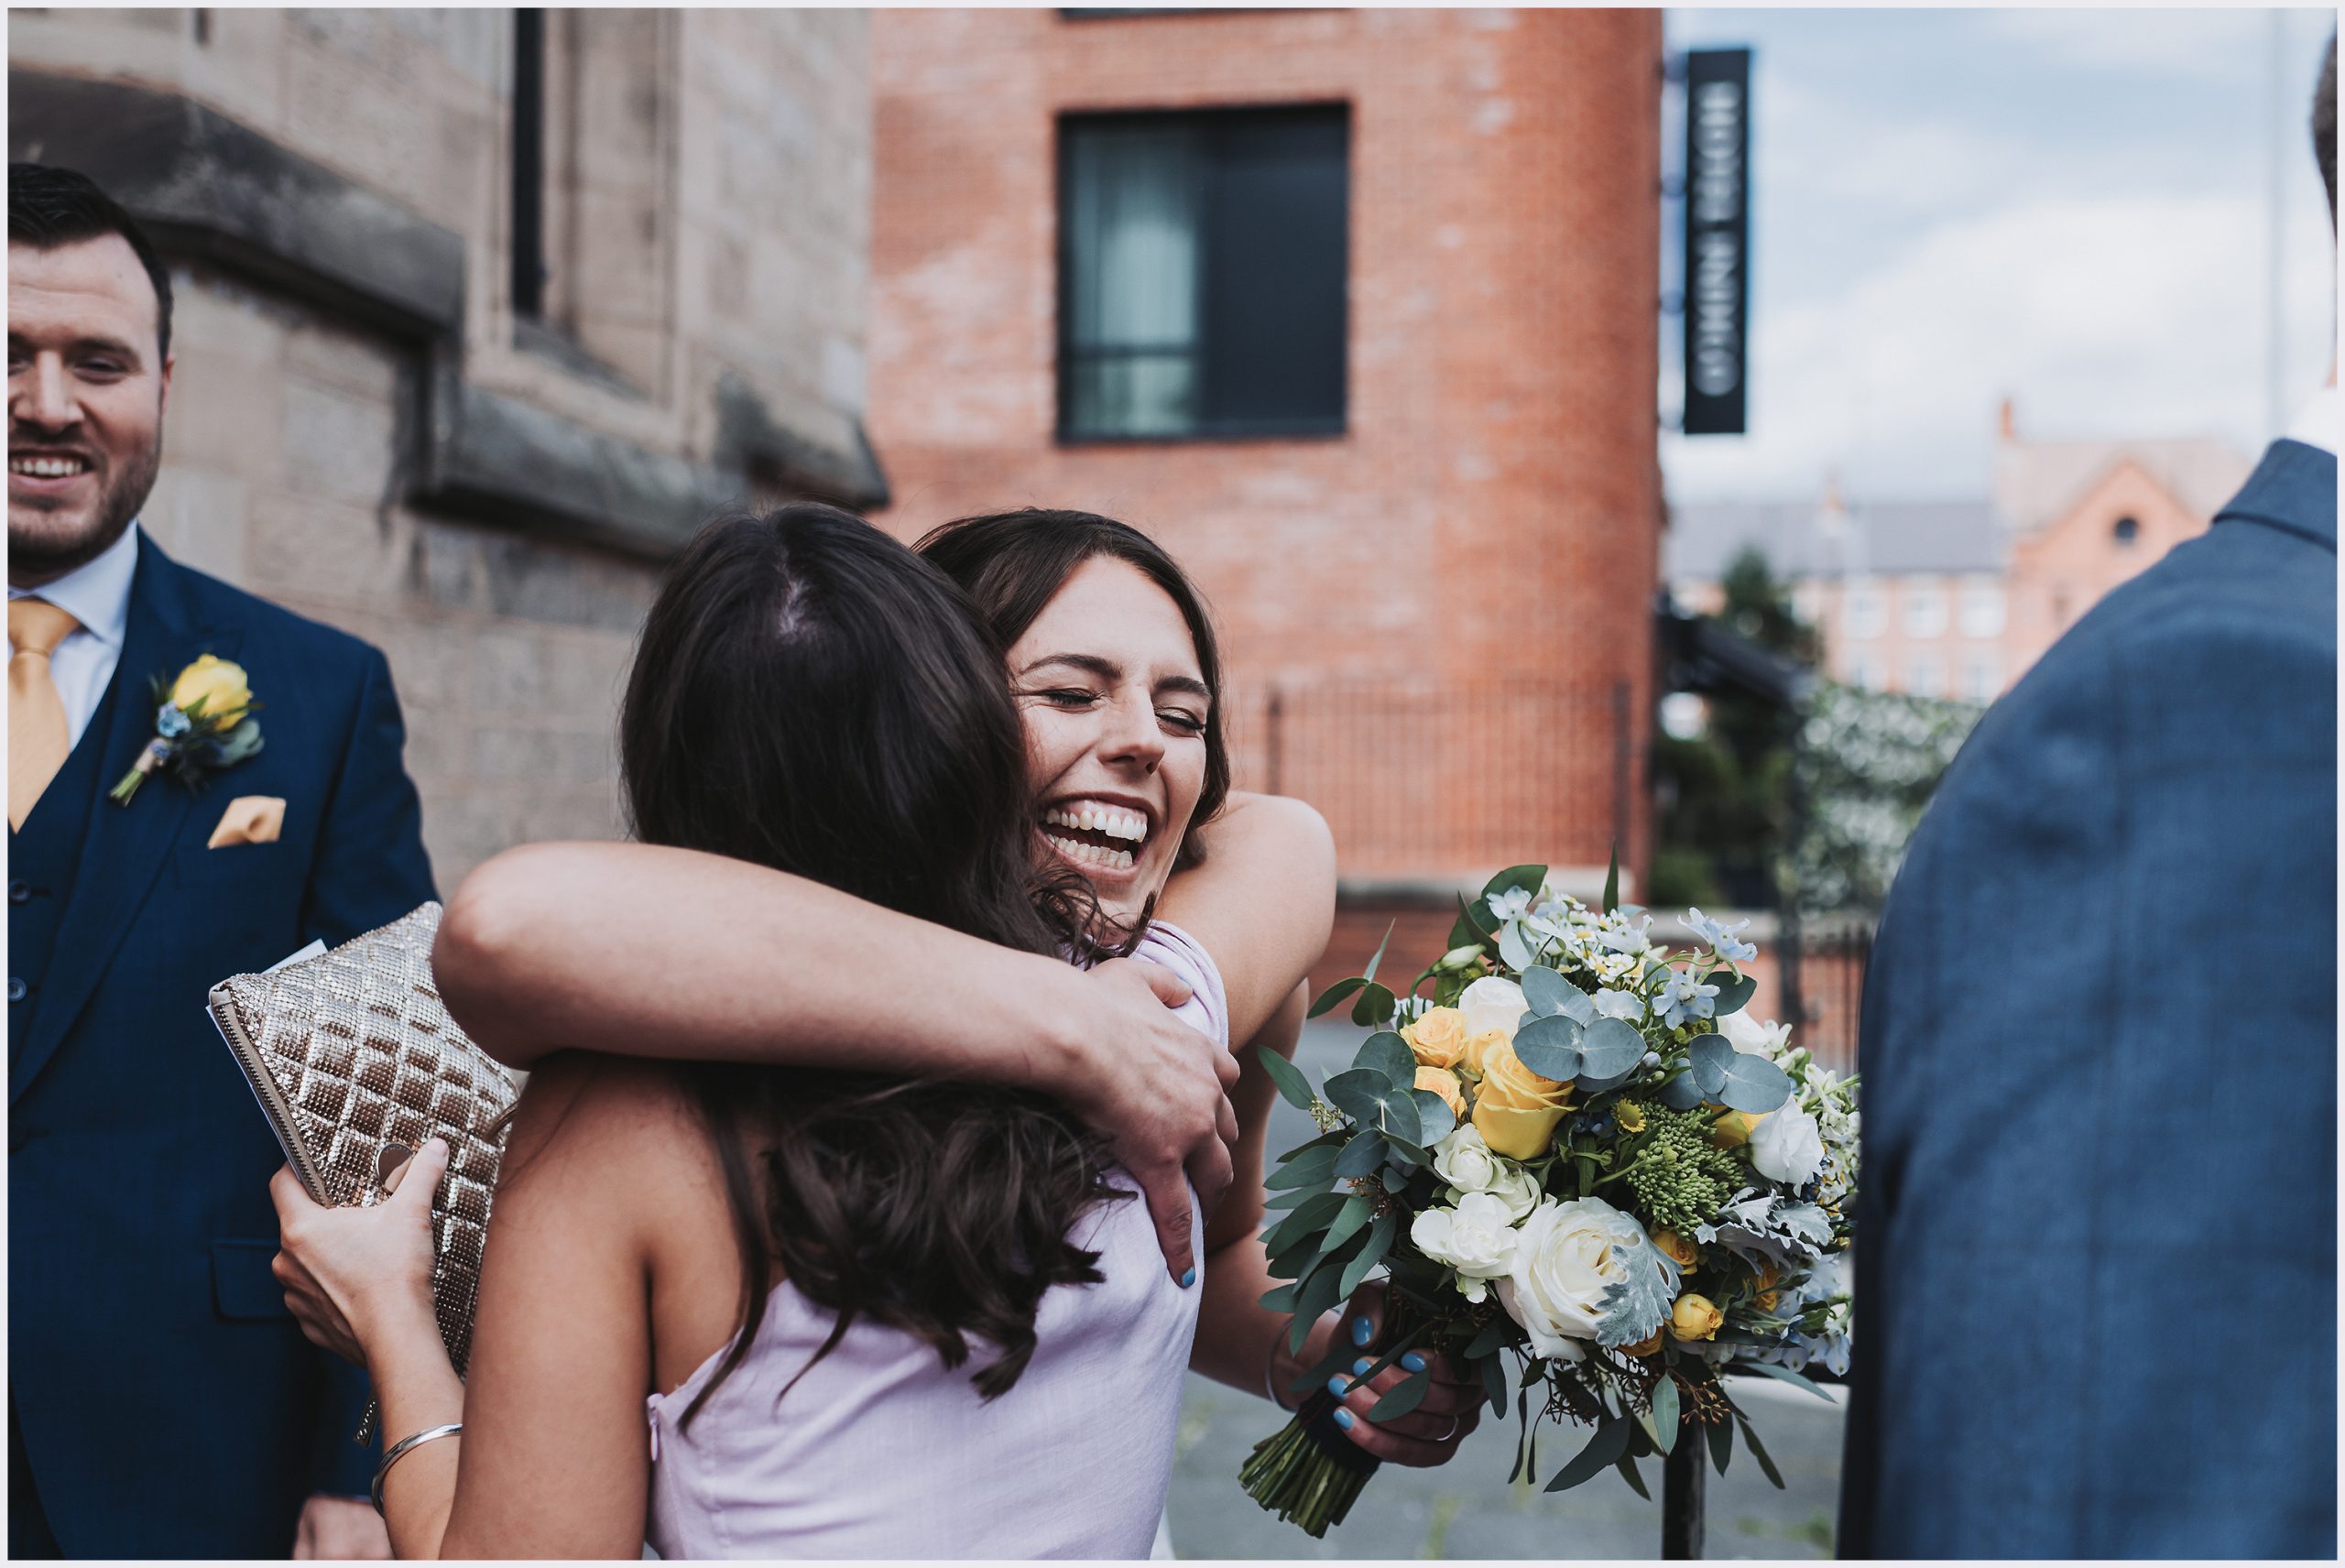 A smiling bride excitedly hugs her friend outside the church where she has just got married.  